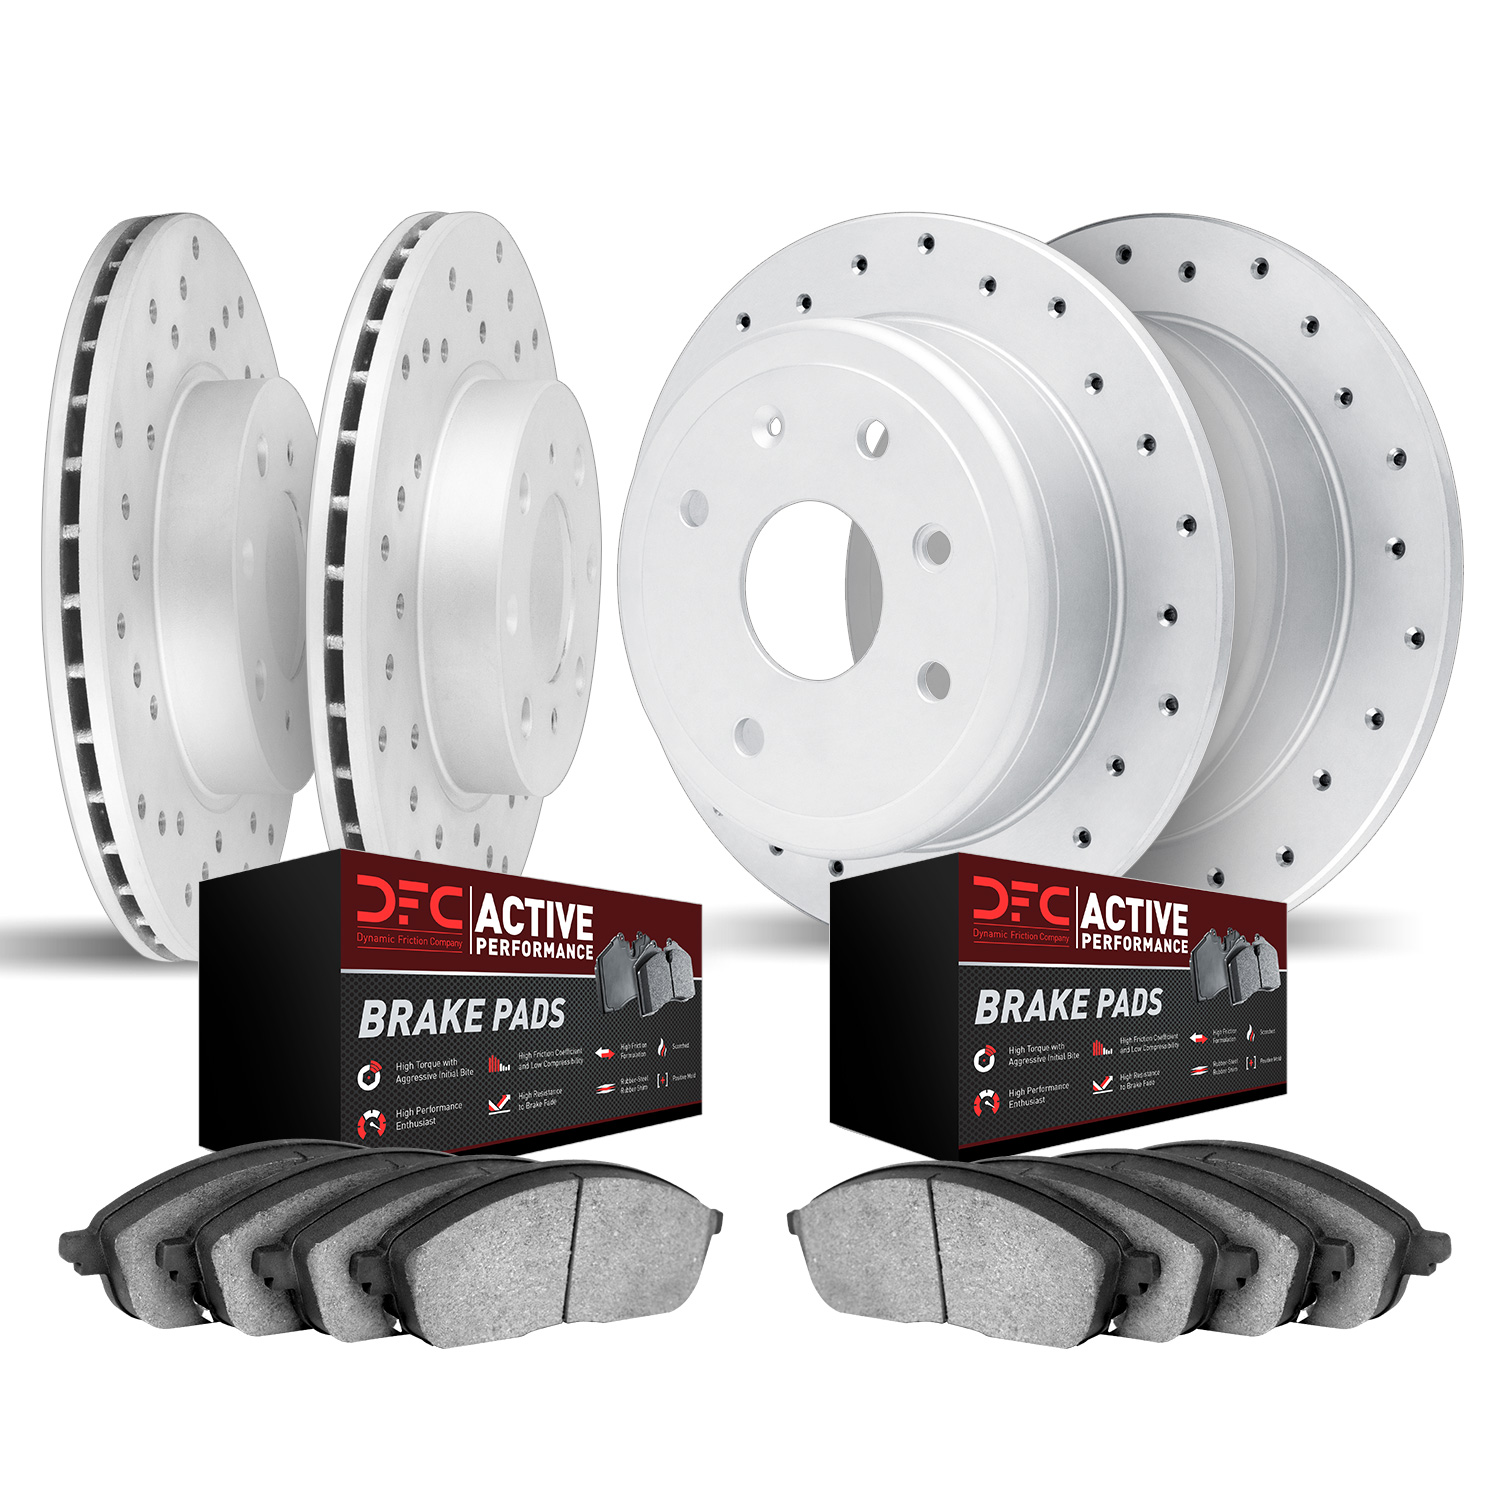 2704-59015 Geoperformance Drilled Brake Rotors with Active Performance Pads Kit, 2001-2005 Acura/Honda, Position: Front and Rear